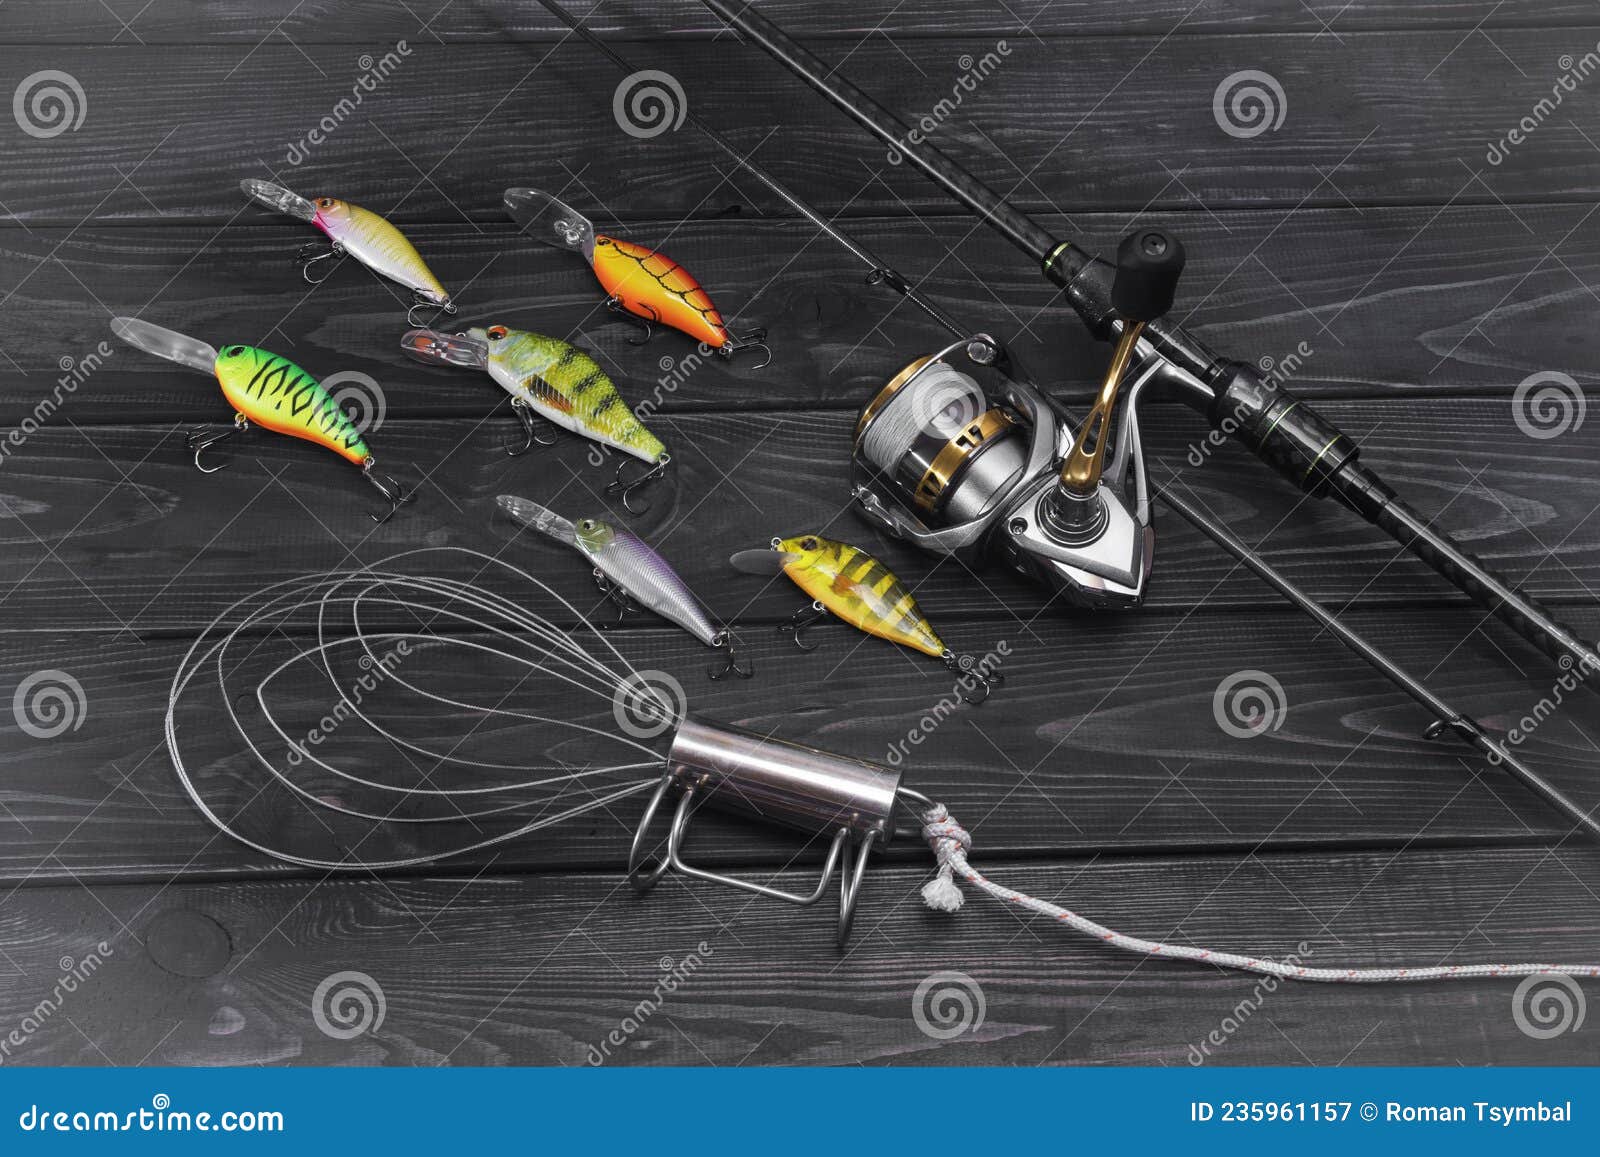 fishing sport rods and reels